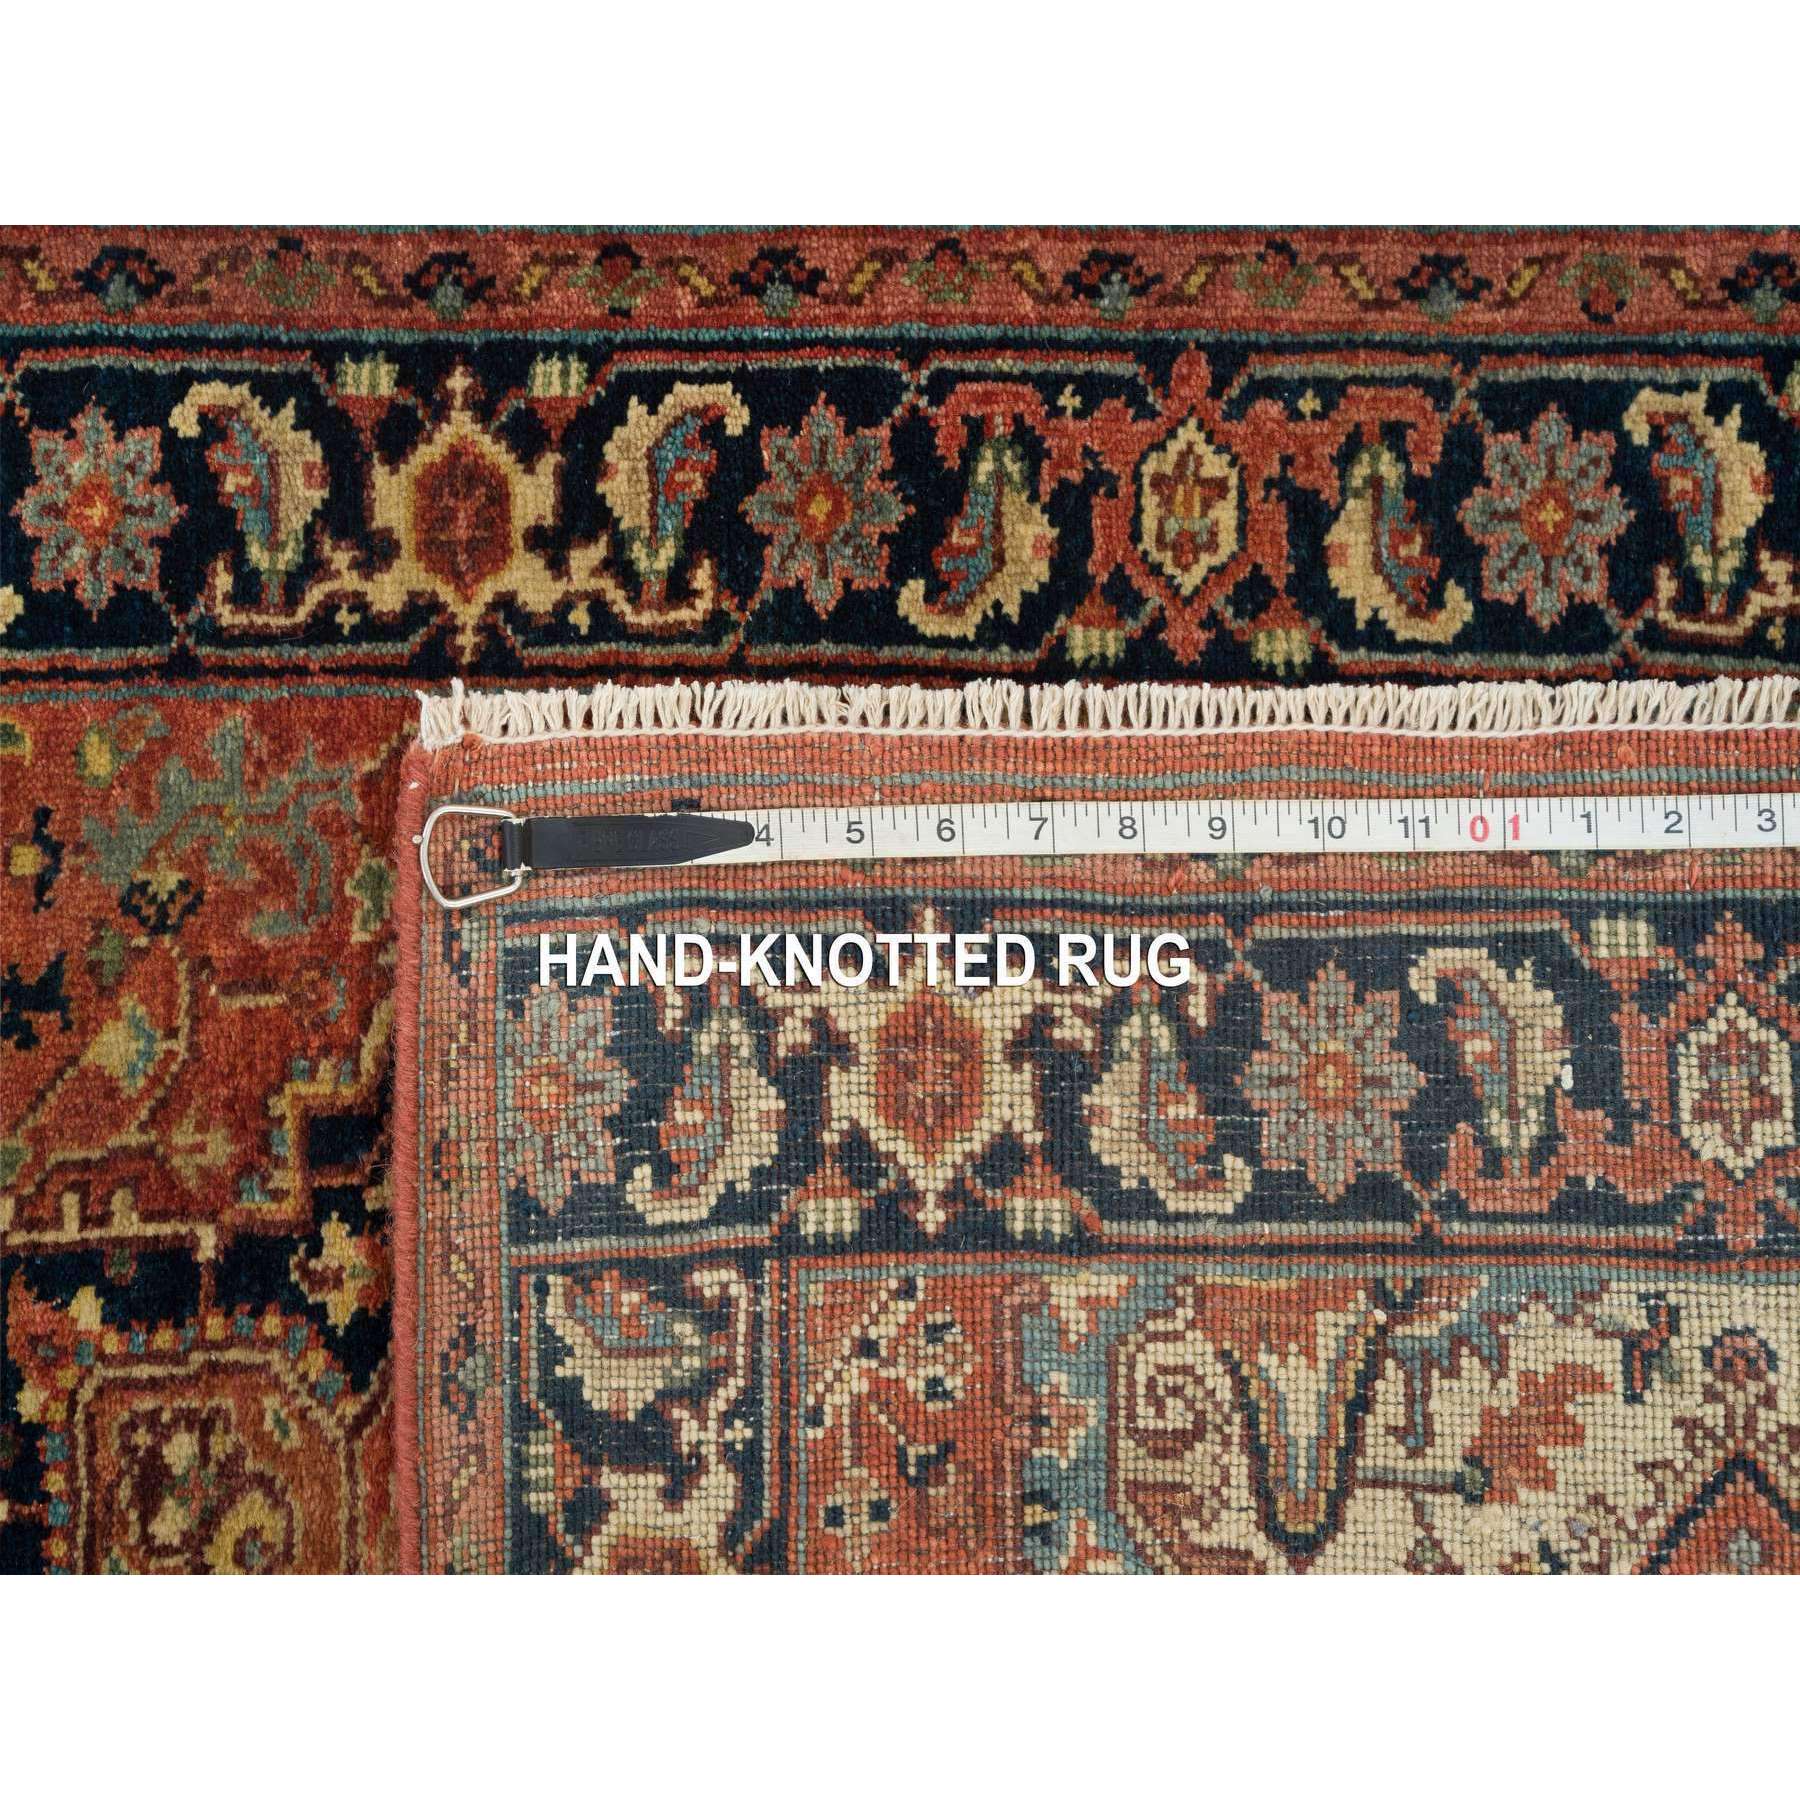 2'6"x22' Terracotta Red, Antiqued Fine Heriz Re-Creation, Natural Dyes, Dense Weave, Hand Woven, Pure Wool, XL Runner Oriental Rug 